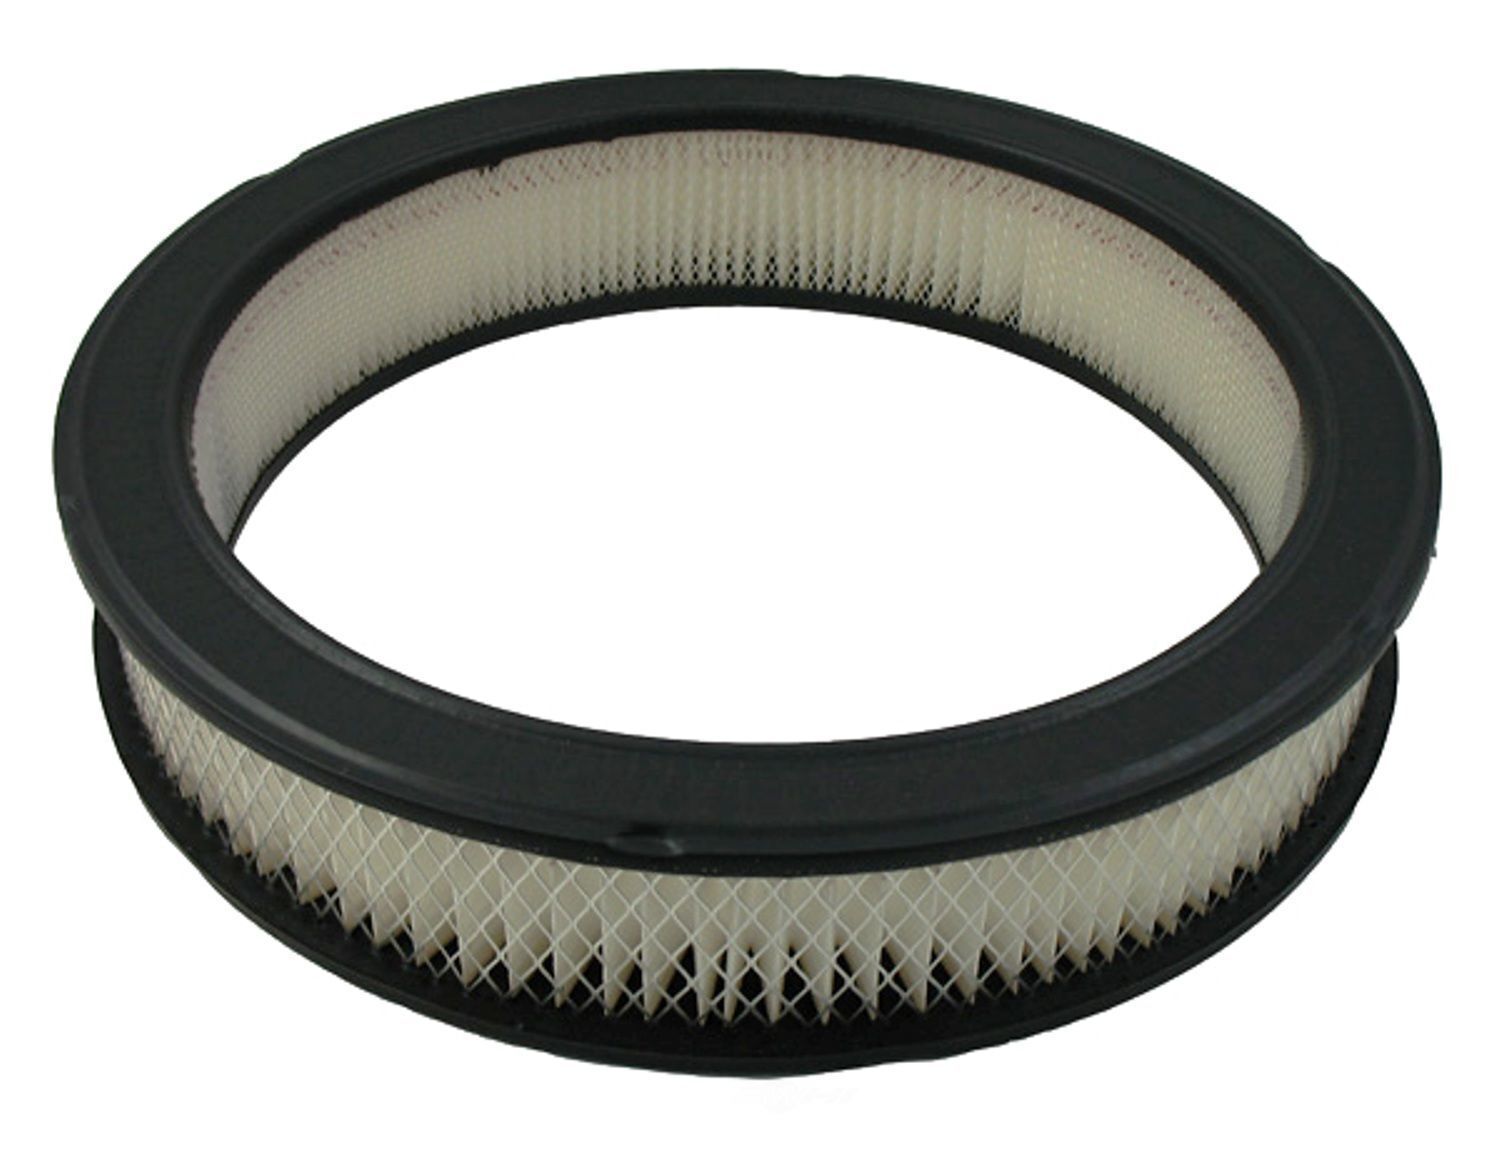 Air Filter for Pontiac Firebird 1977-1992 with 5.0L 8cyl Engine